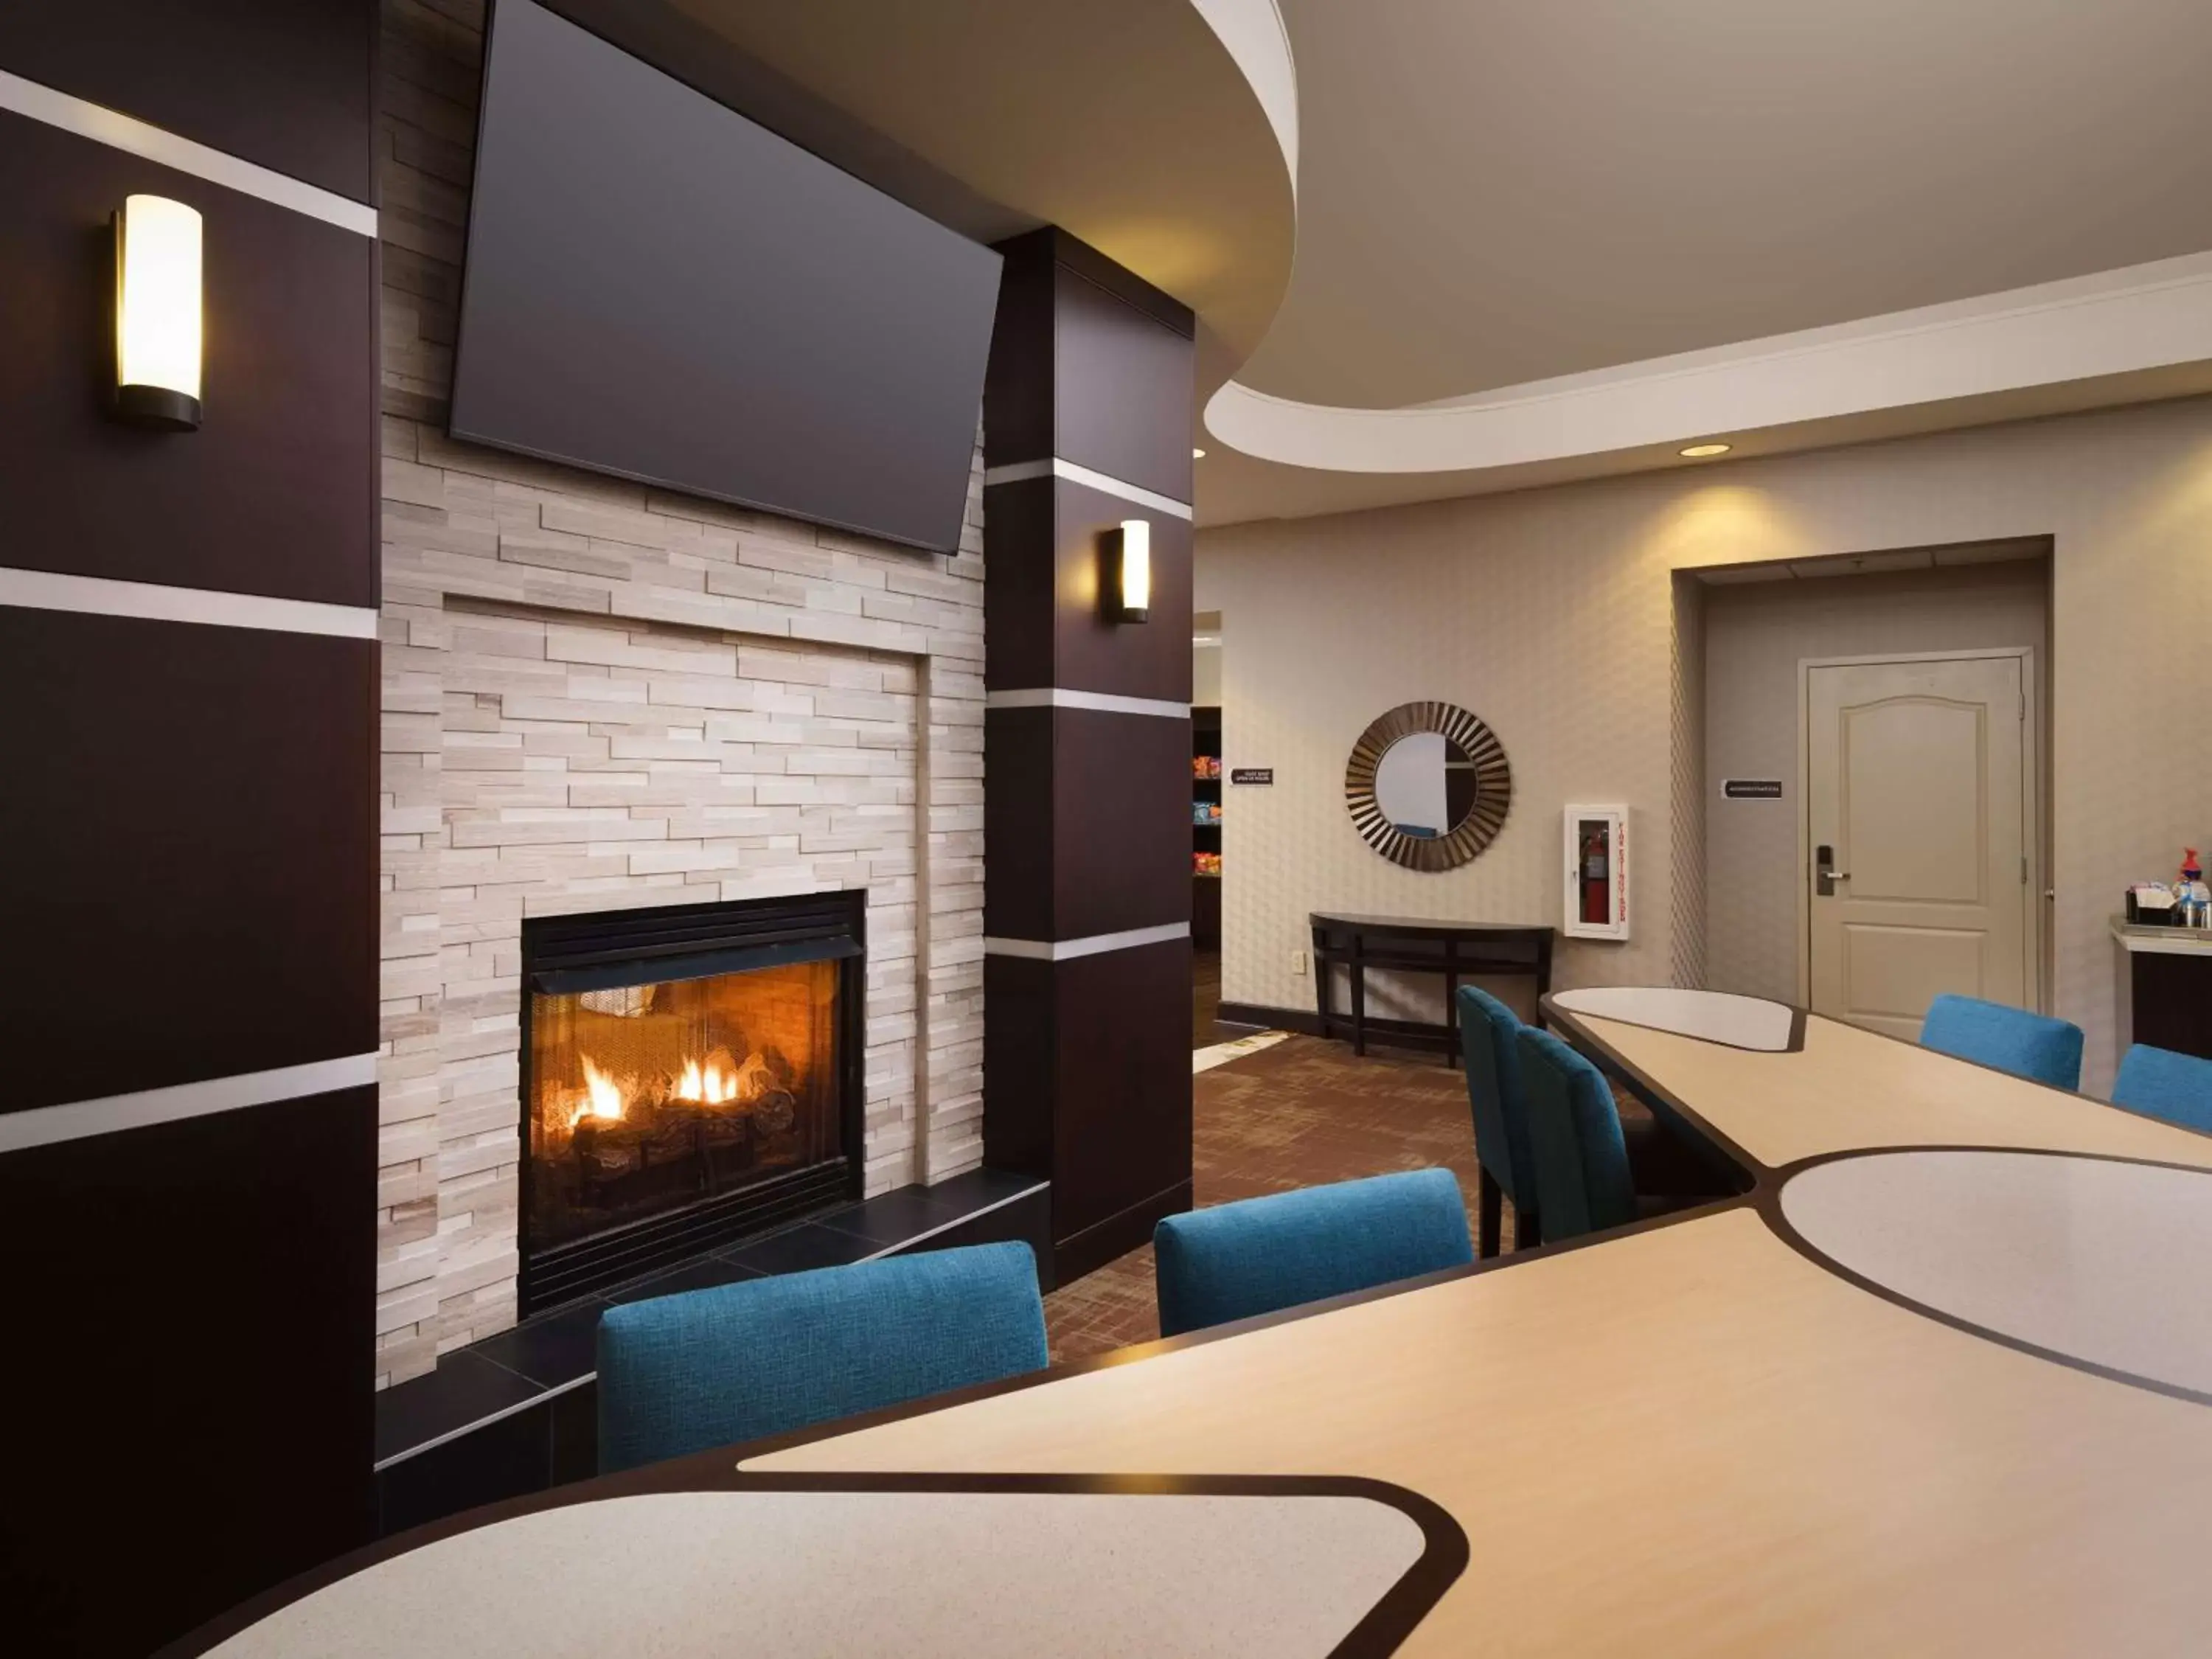 Dining area in Homewood Suites by Hilton Atlanta NW/Kennesaw-Town Center